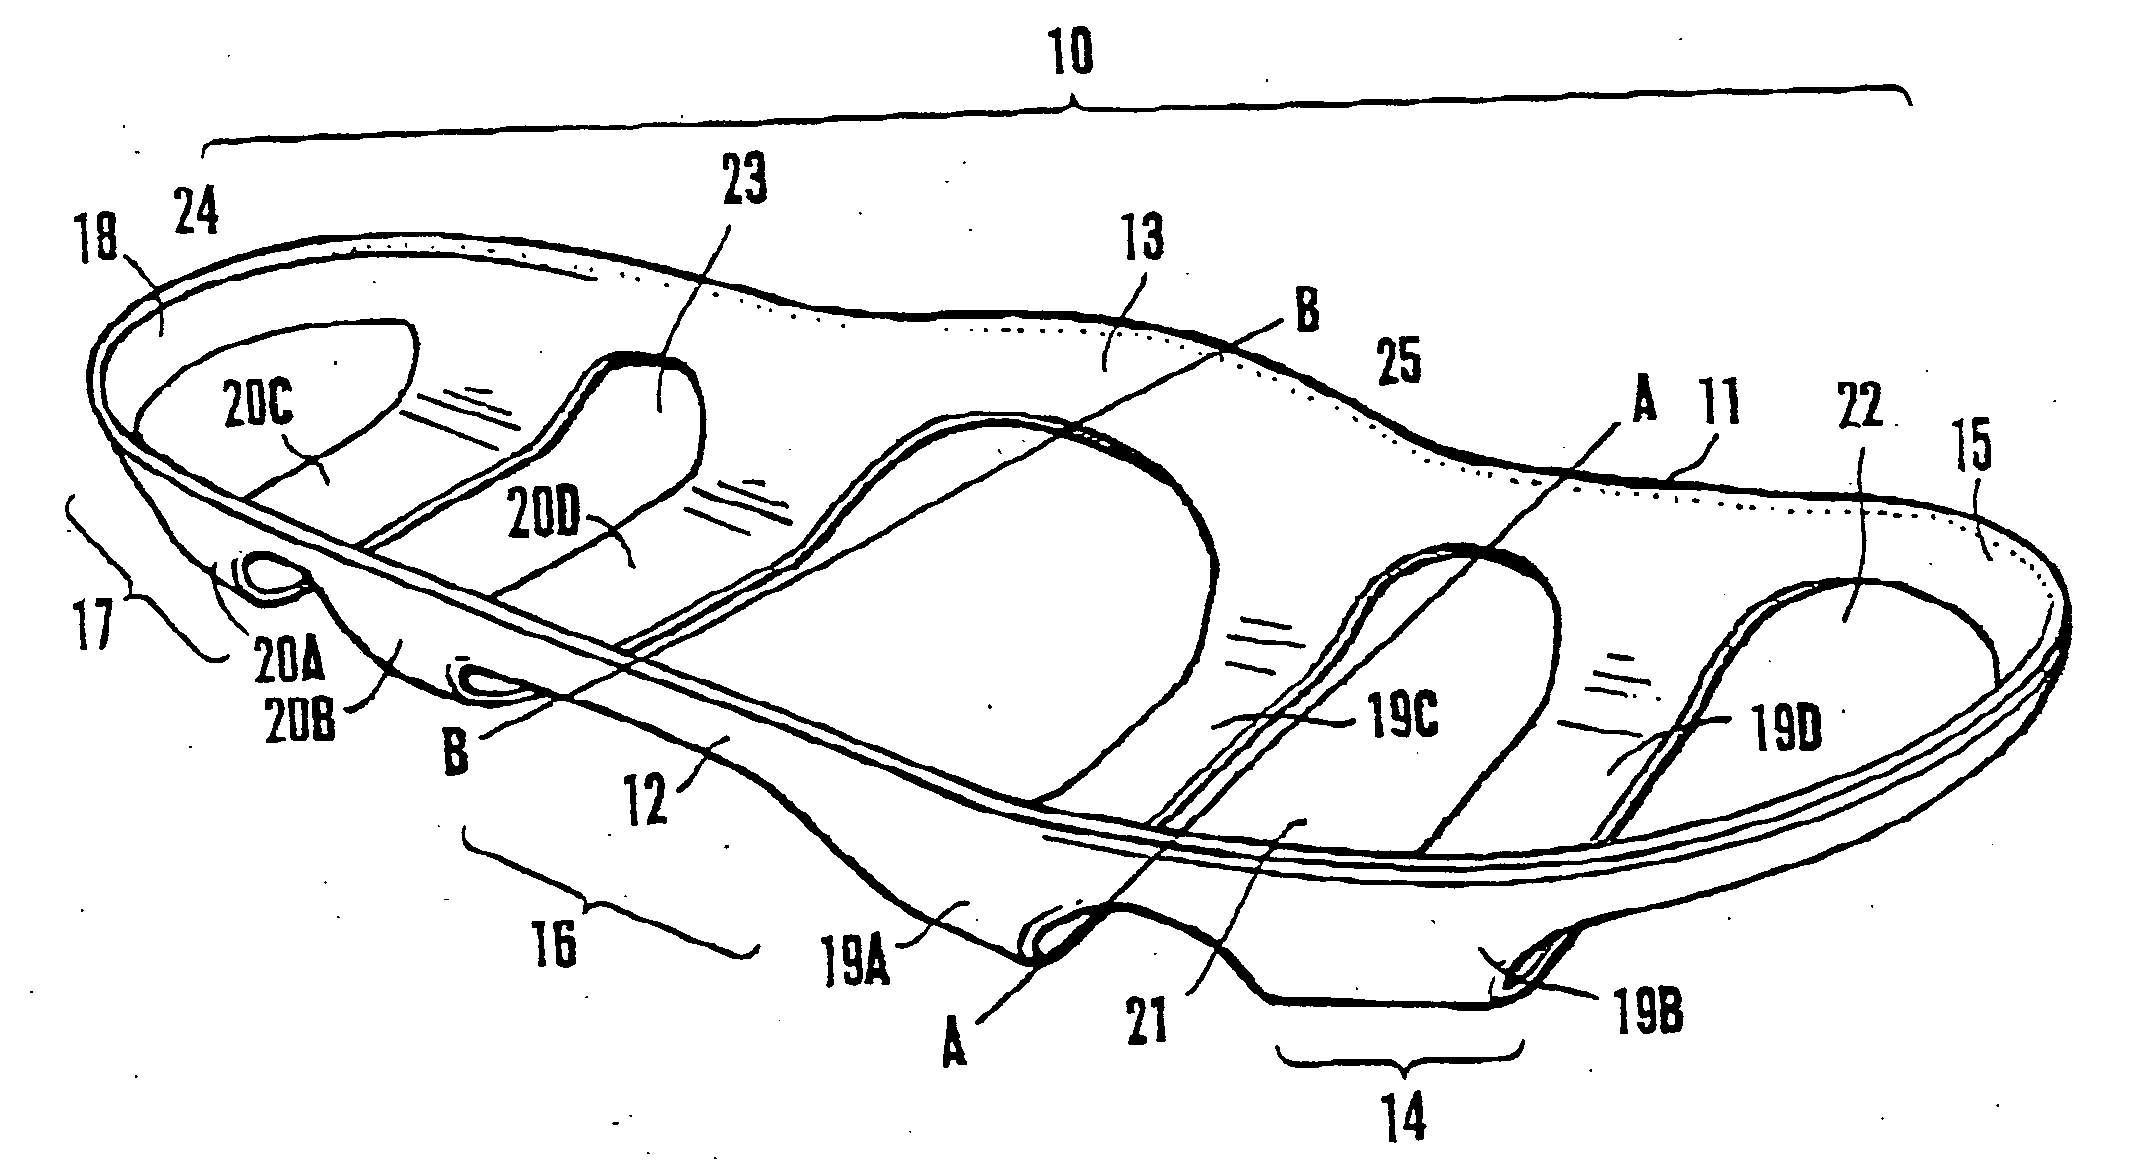 Device for suspending a foot within a shoe and shoes incorporating such devices